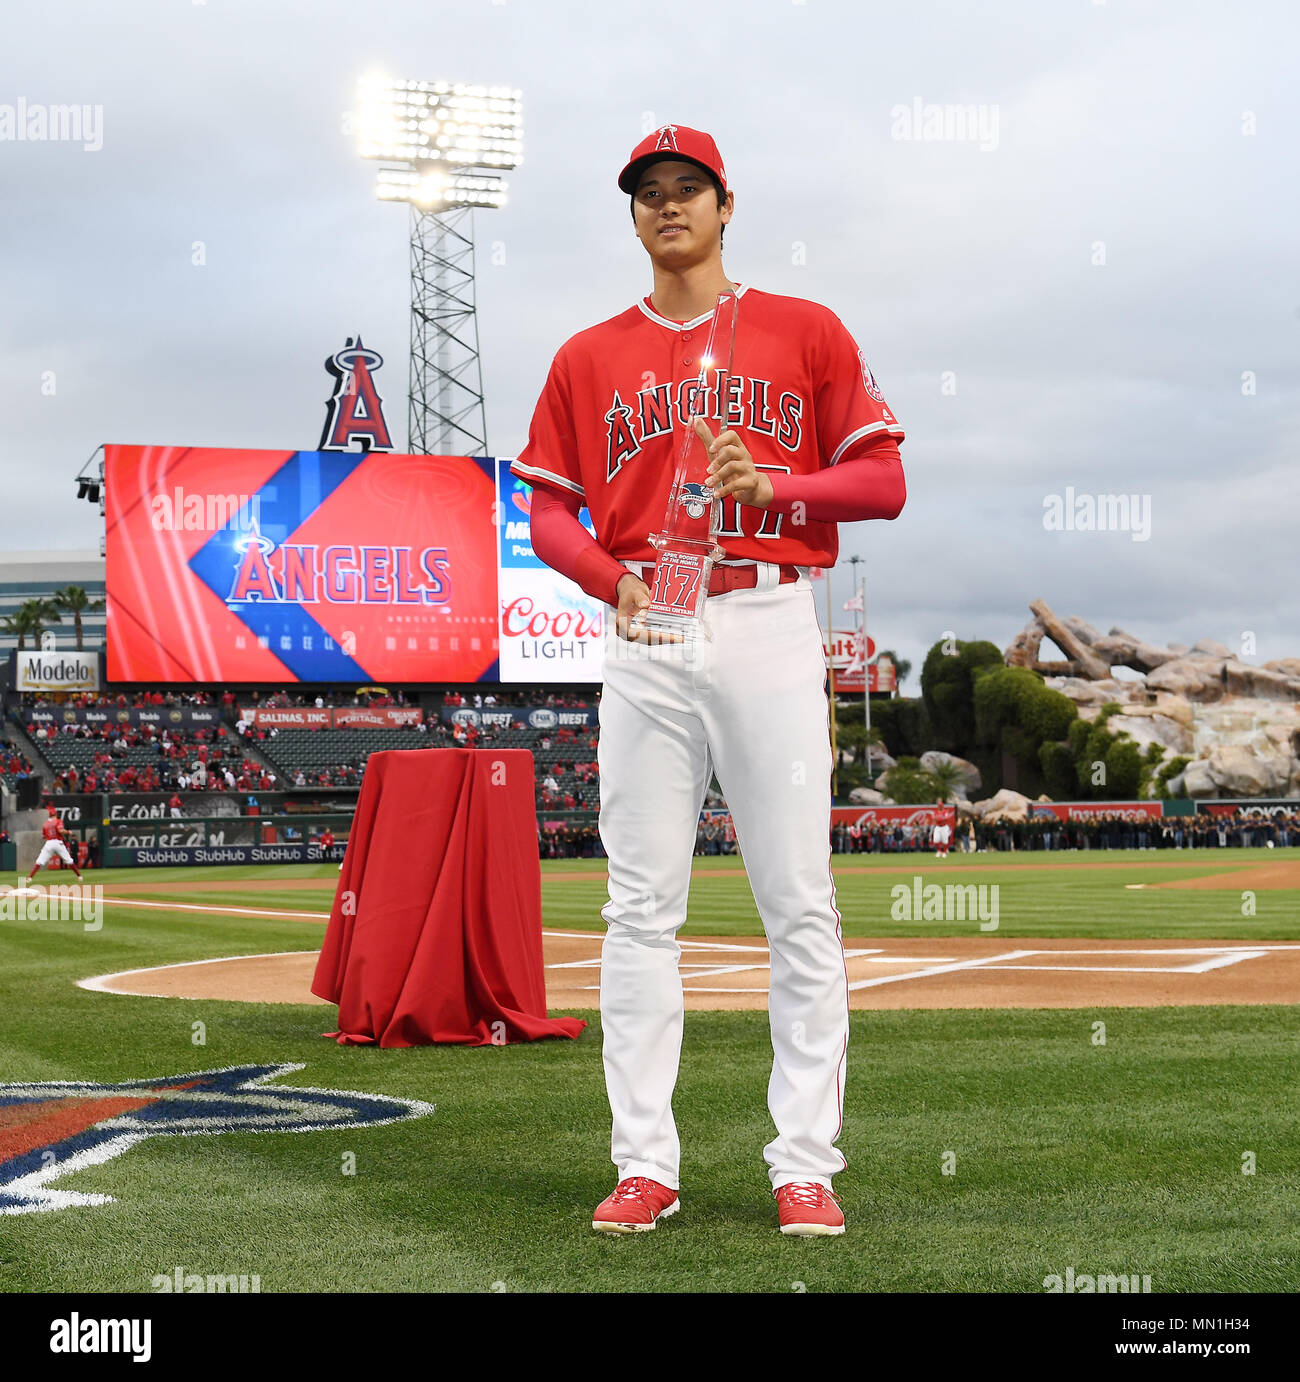 Shohei Ohtani of the Los Angeles Angels receives the American League Rookie of the Month for April award trophy before the Major League Baseball game against the Minnesota Twins at Angel Stadium